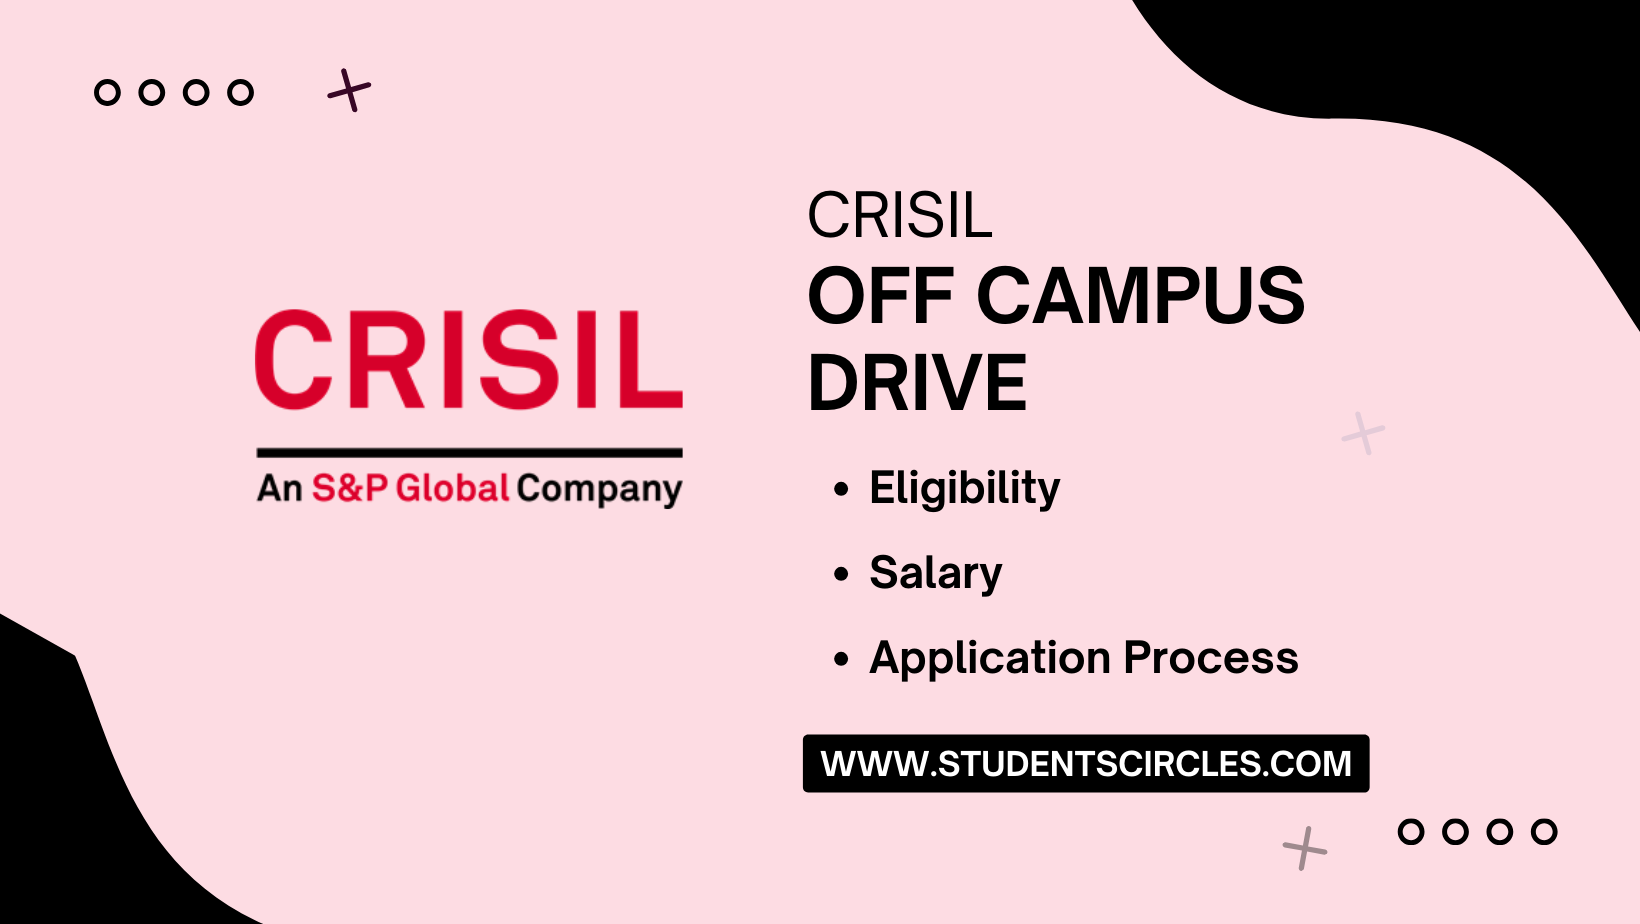 CRISIL Off Campus Drive